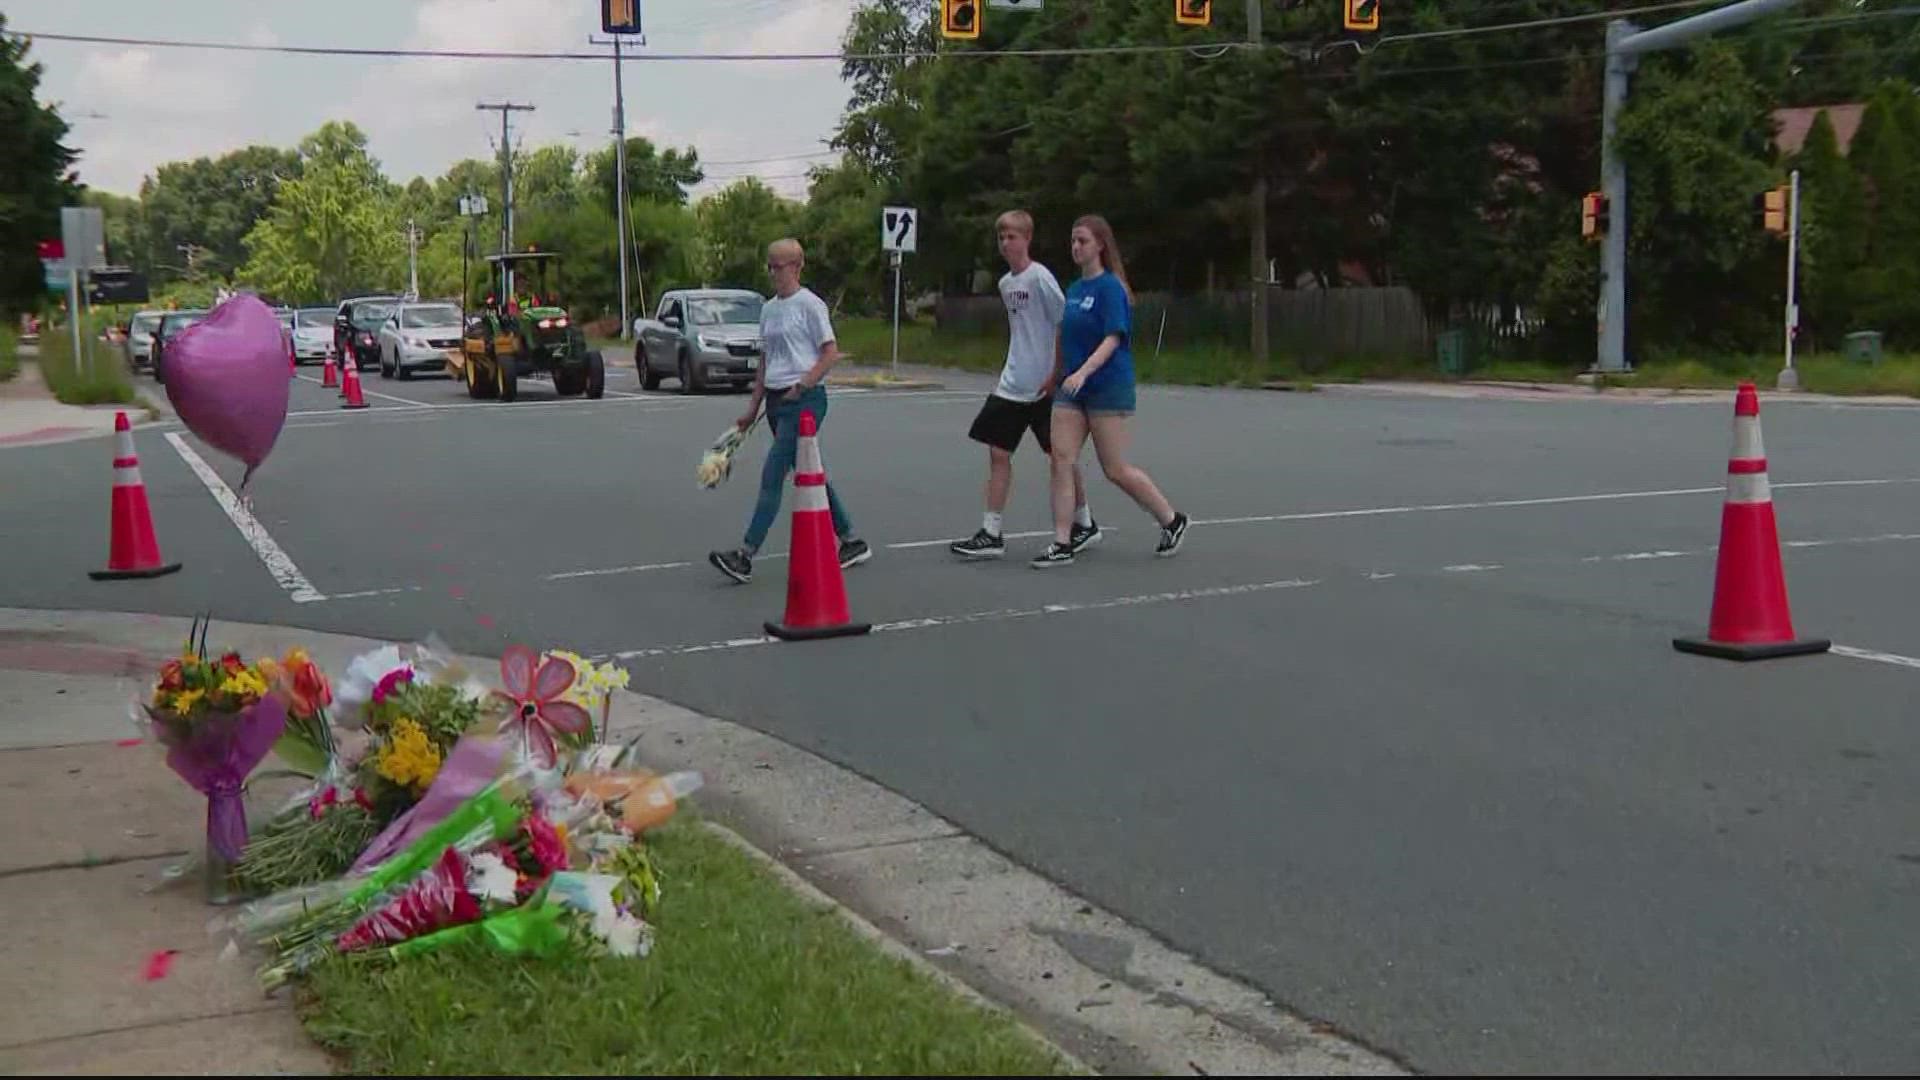 The 18-year-old driver of the car that hit the pedestrians is expected to be arrested and charged, Fairfax County Police said.